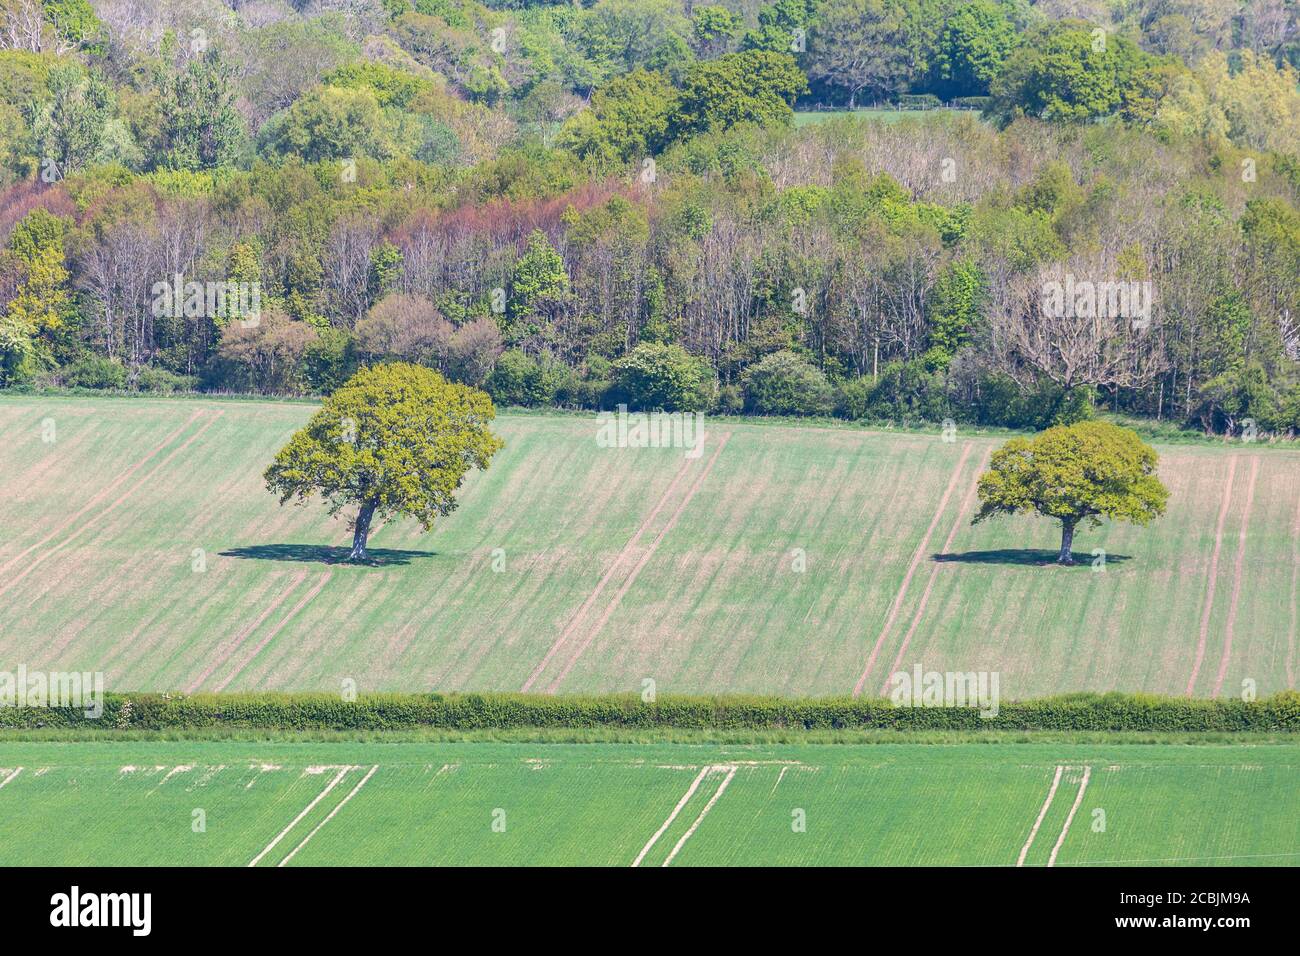 Looking down on trees in a field, on a sunny spring day Stock Photo